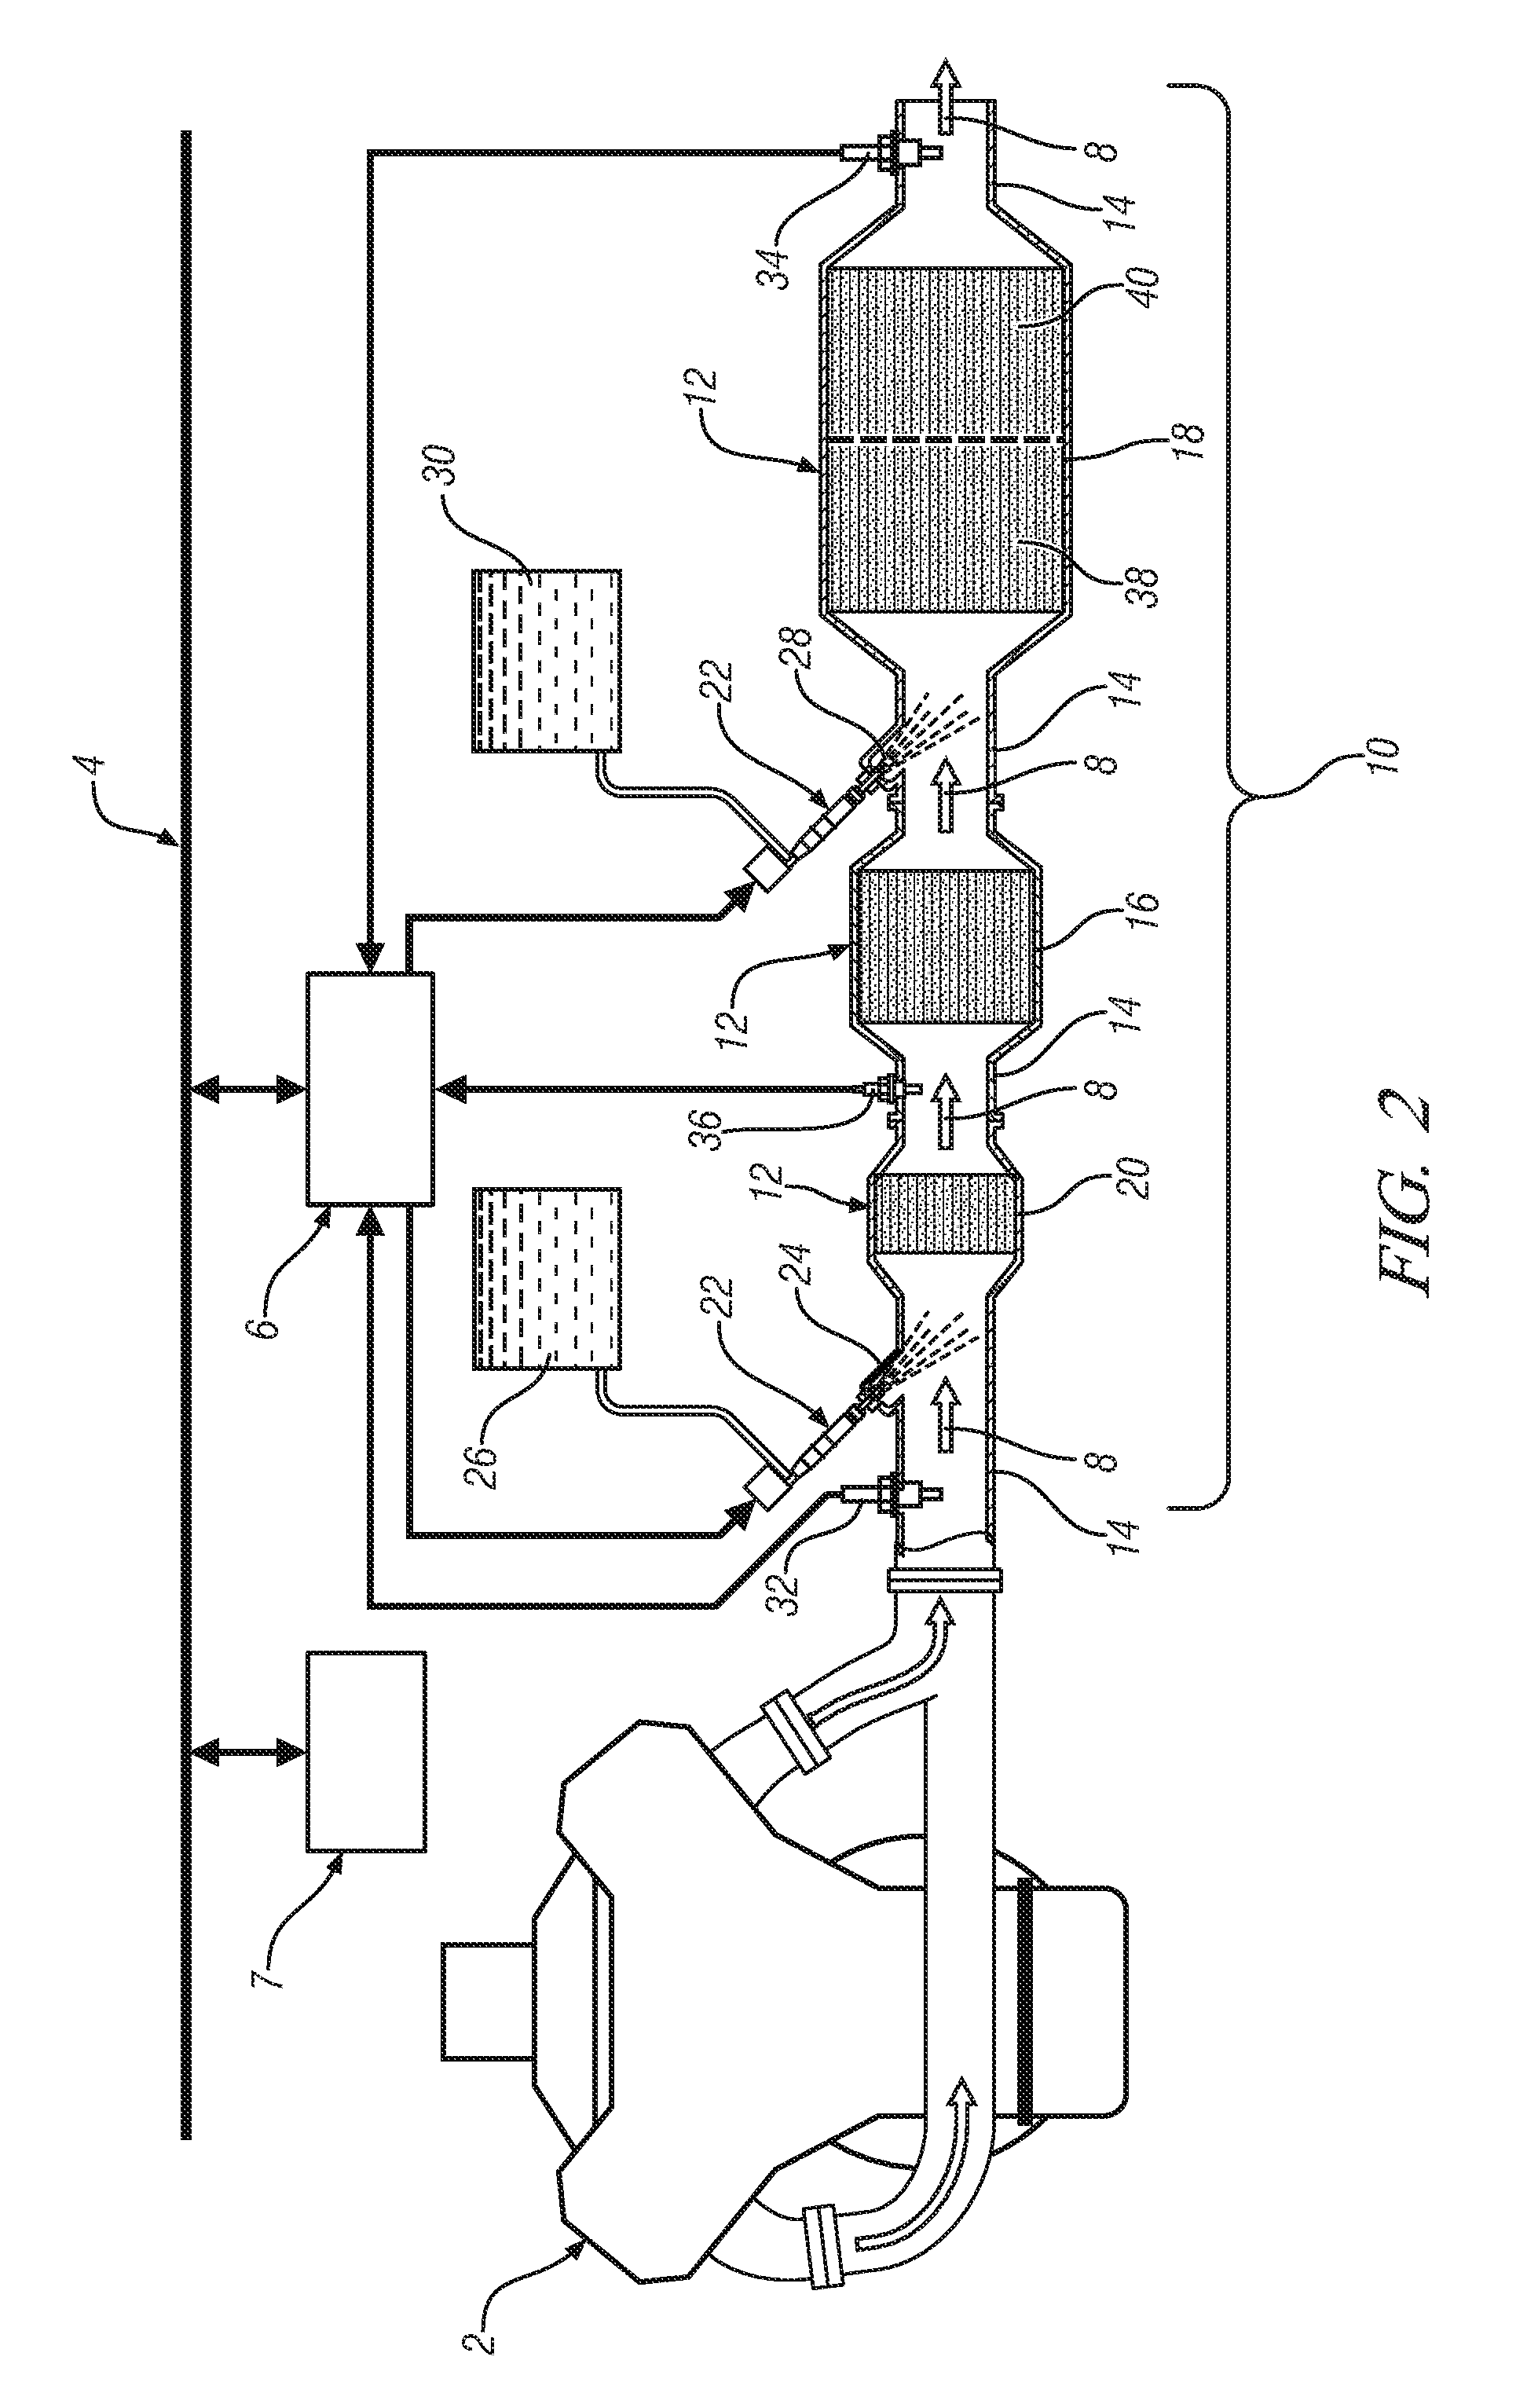 Exhaust gas treatment system including a lean NOX trap and two-way catalyst and method of using the same